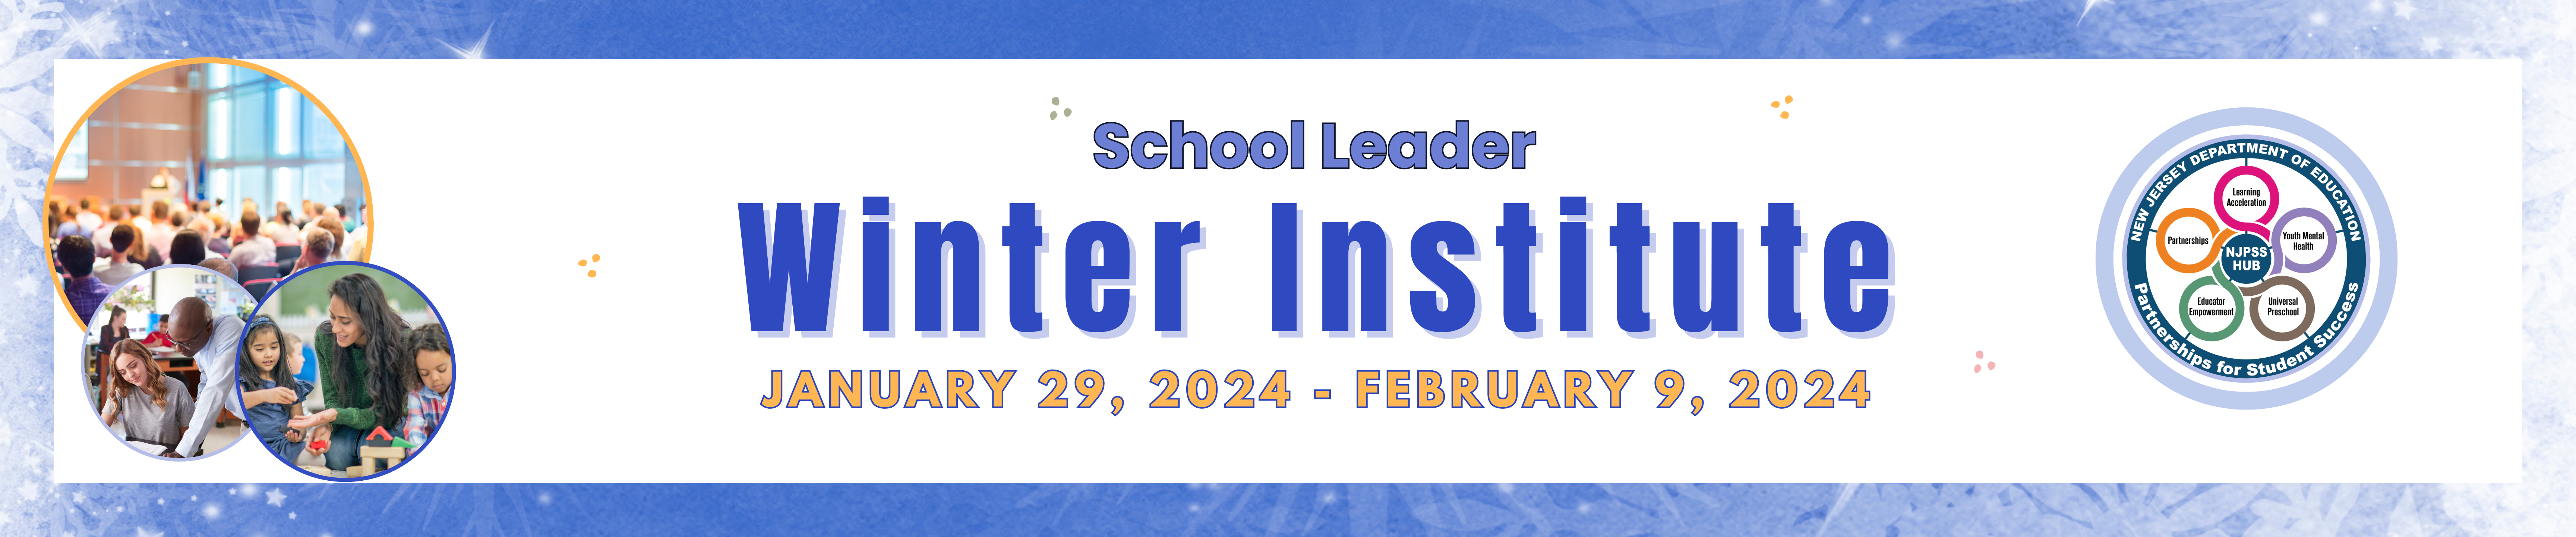 winter institute banner with border inviting guests to join us for training in January and February of 2024 with the logo for the winter institute on the right hand side with three other images of educators and students on the left